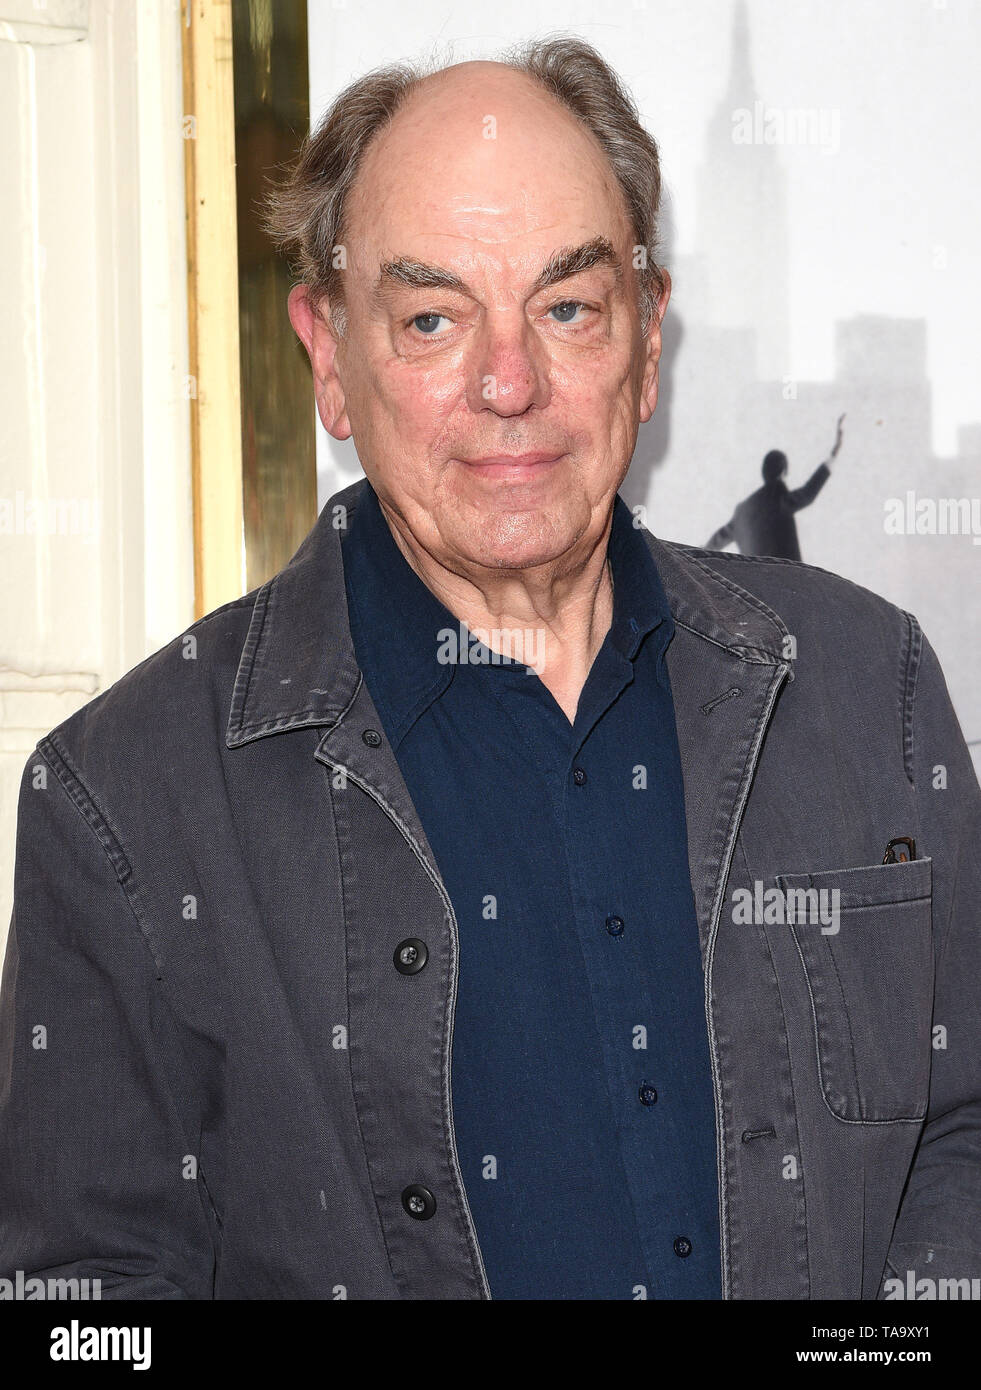 London, UK. Alun Armstrong  at The Lehman Trilogy Press Night held at Piccadilly Theatre, Denman Street, London on Wednesday 22 may 2019  May 2019   Ref: LMK392-J4931-230519 Vivienne Vincent/Landmark Media.  . Stock Photo